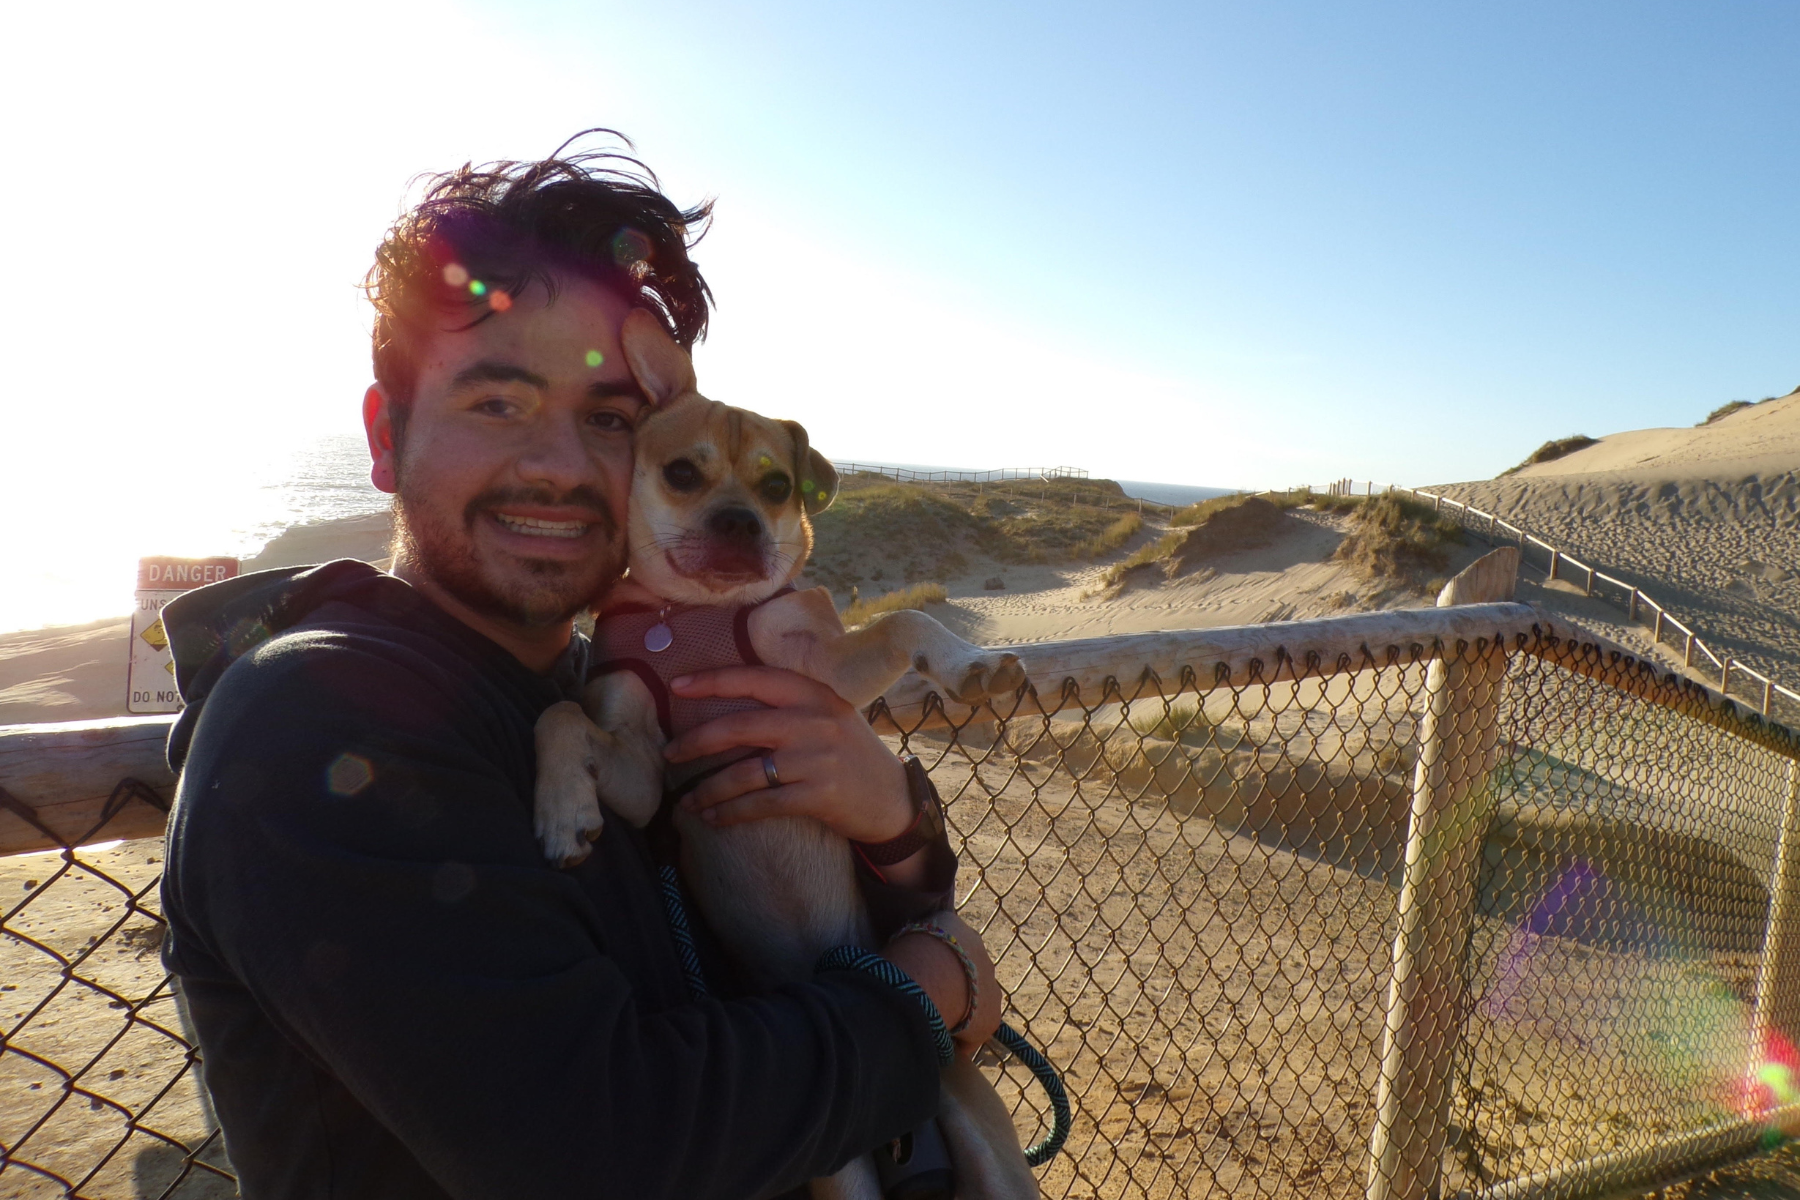 Man standing with a dark hoodie on, holding a small dog. The man is in front of a fence that surrounds sand dunes at a beach.